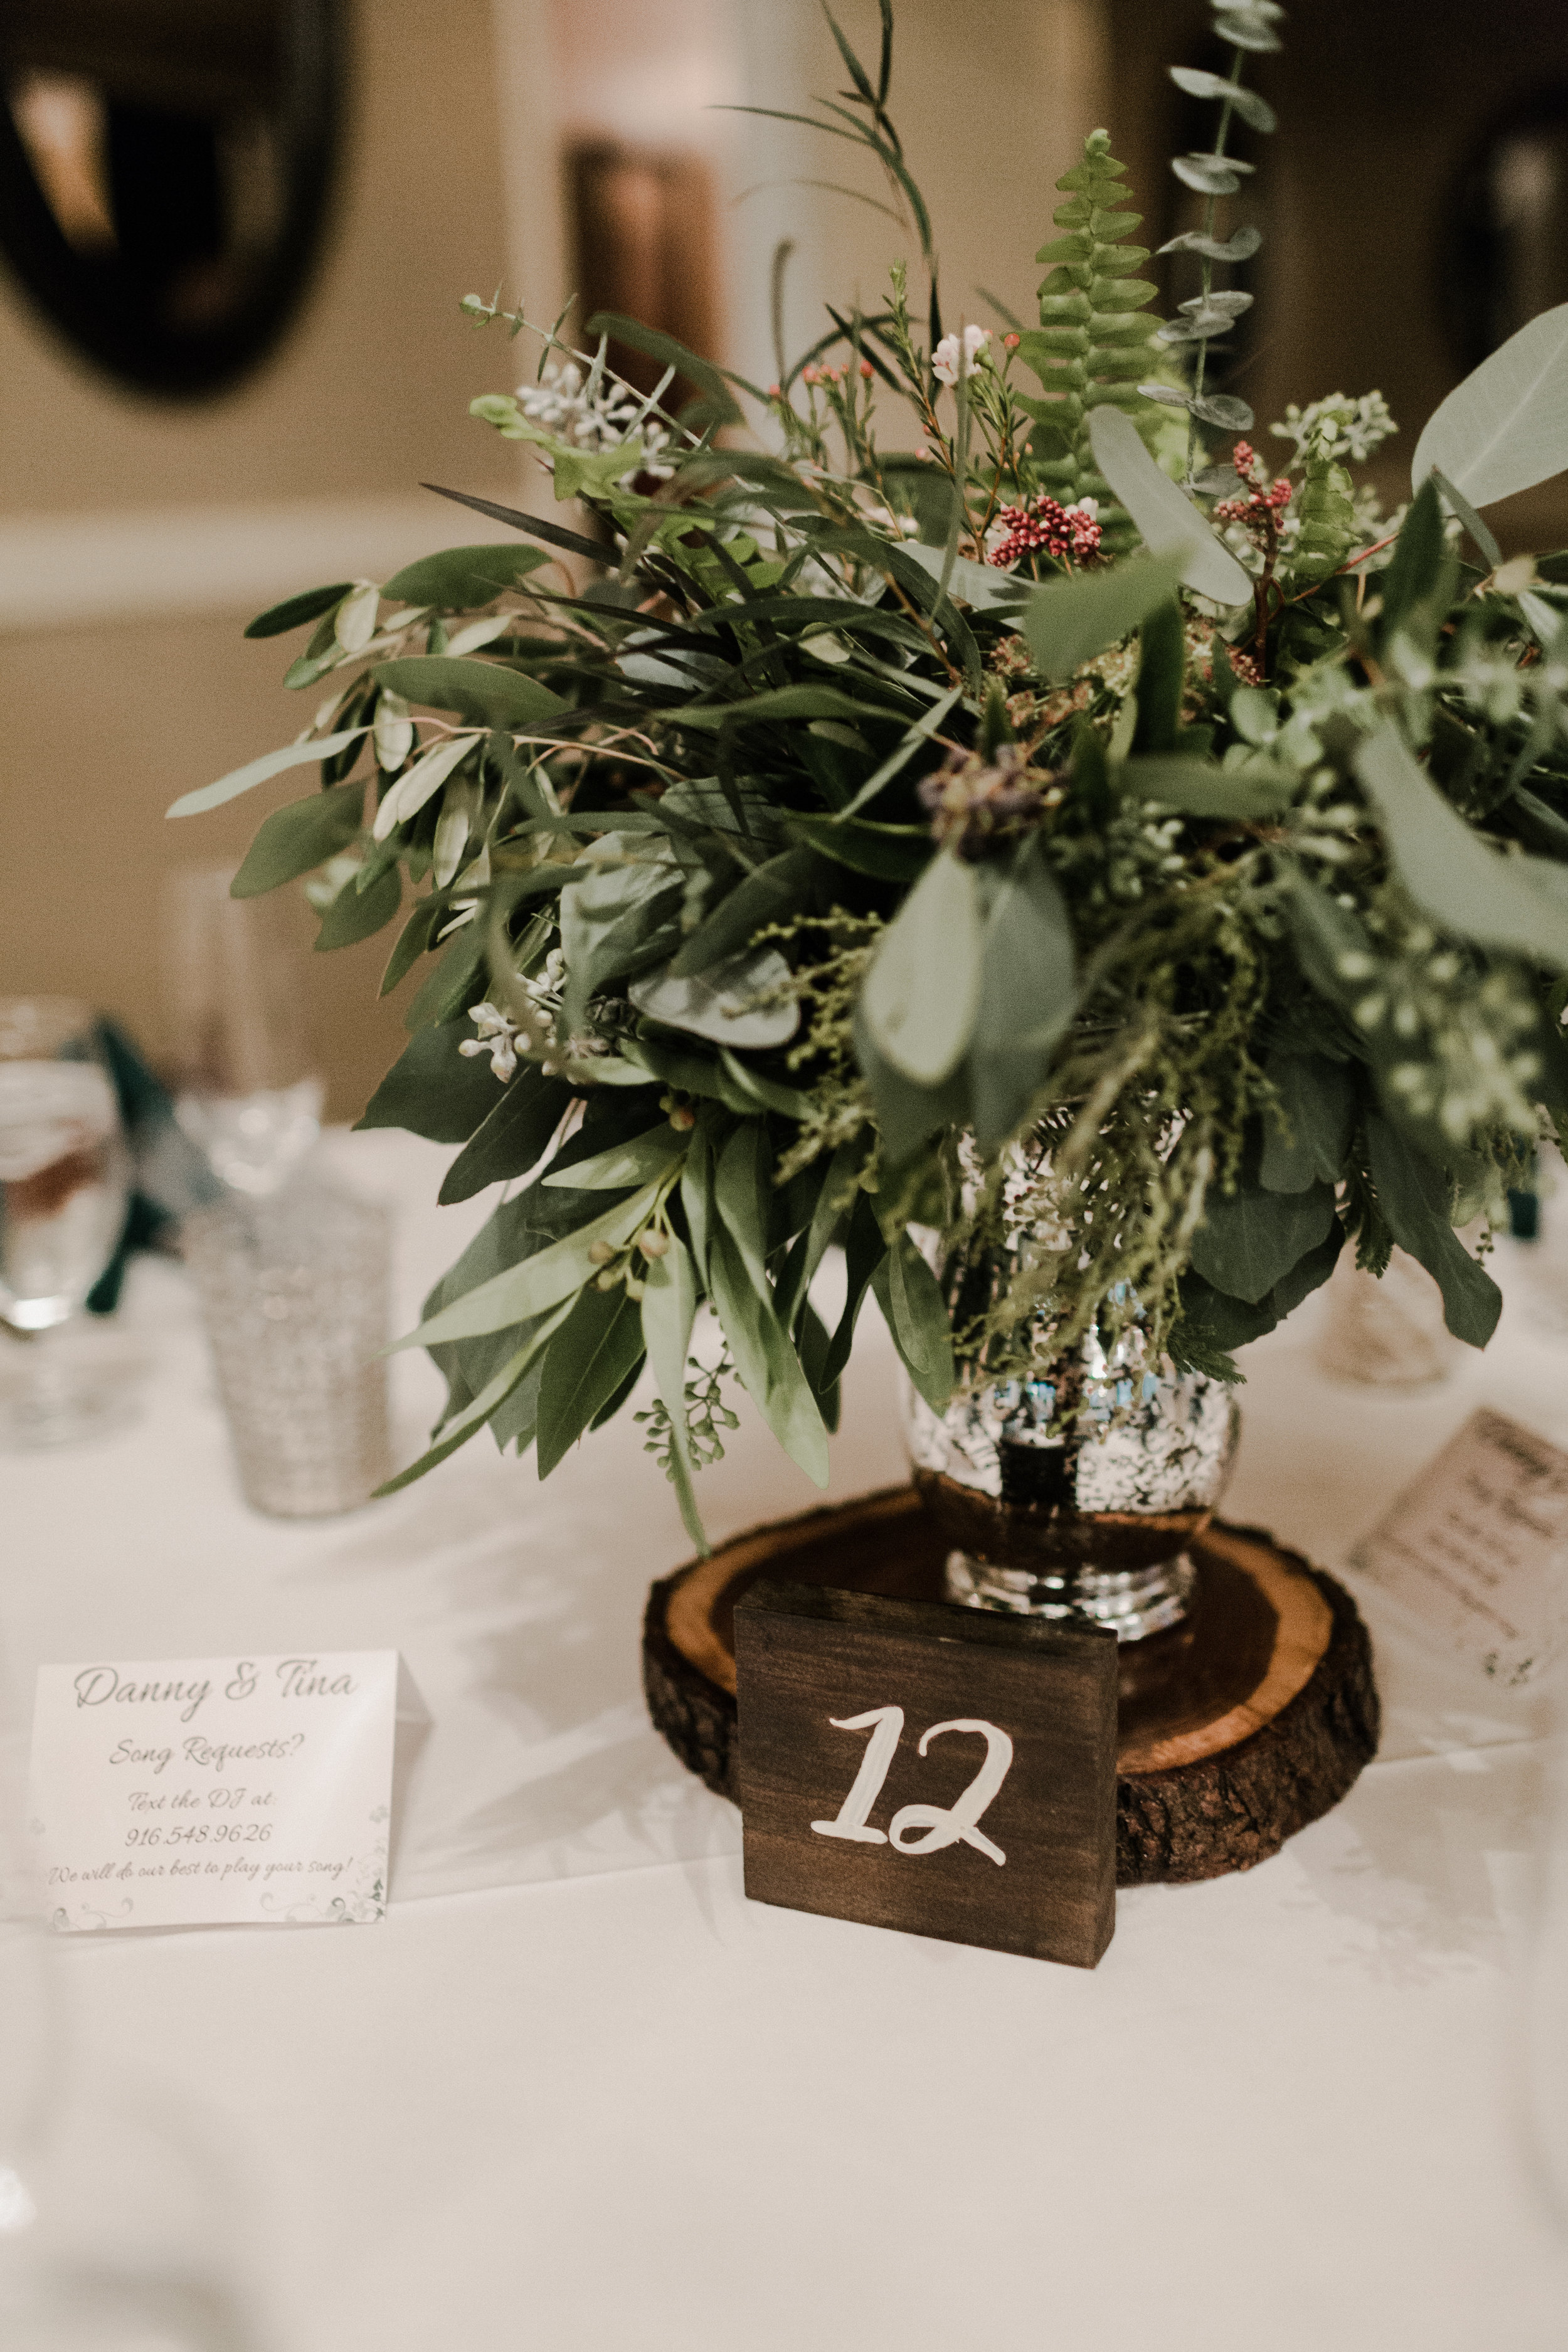 Deer Park Villa ~ Tina and Danny's Winter Wedding — Perfectly Planned ...